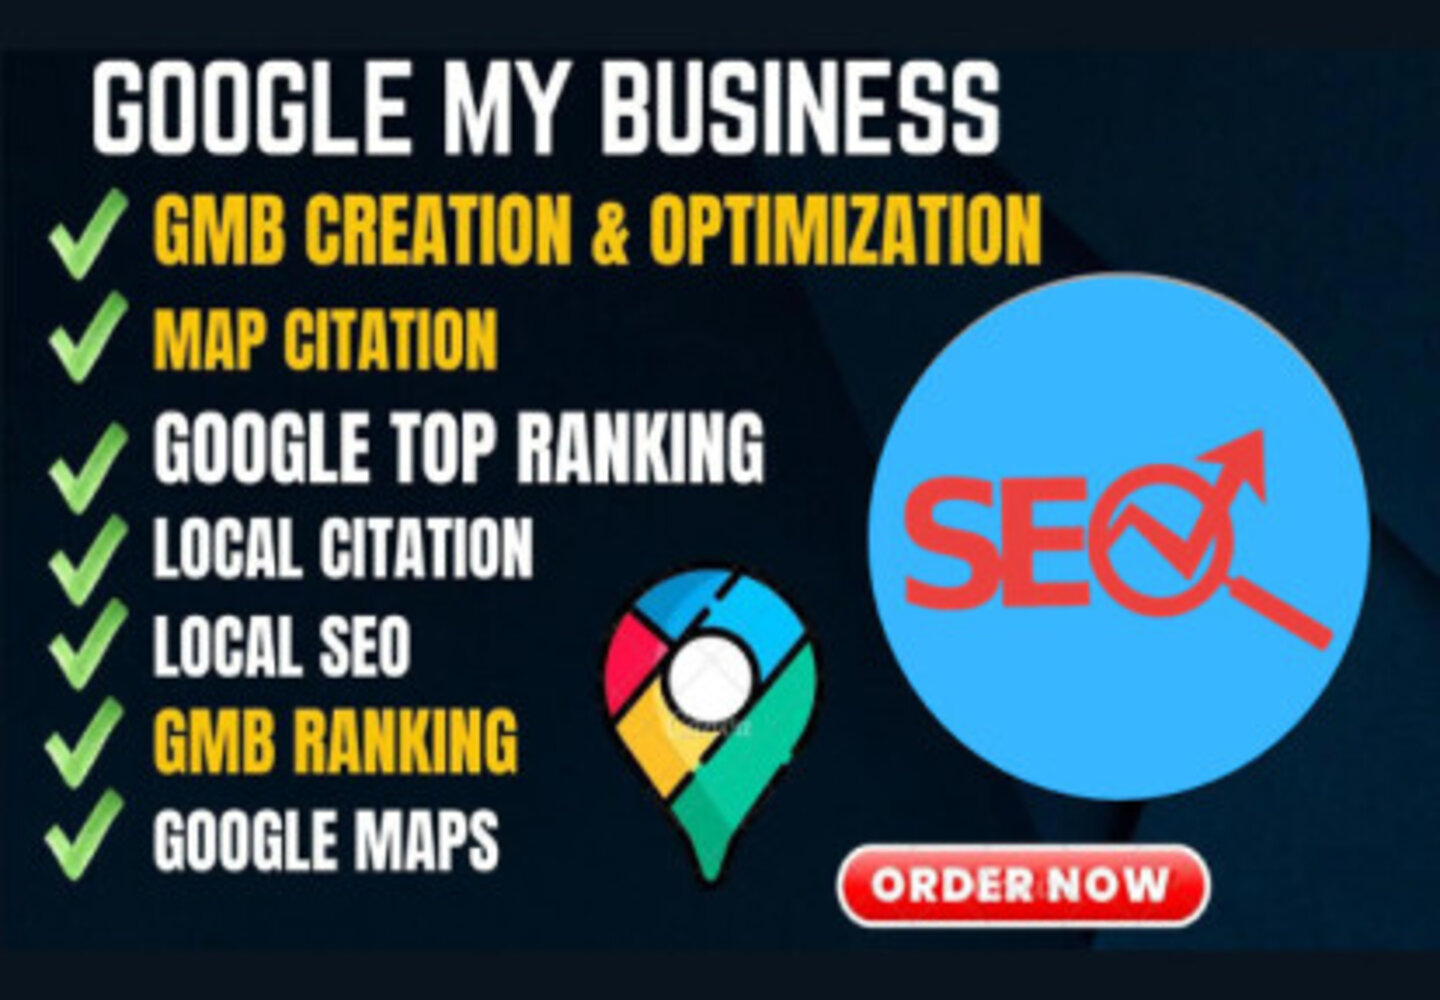 I will optimize and your gmb for local SEO, map citation and ranking